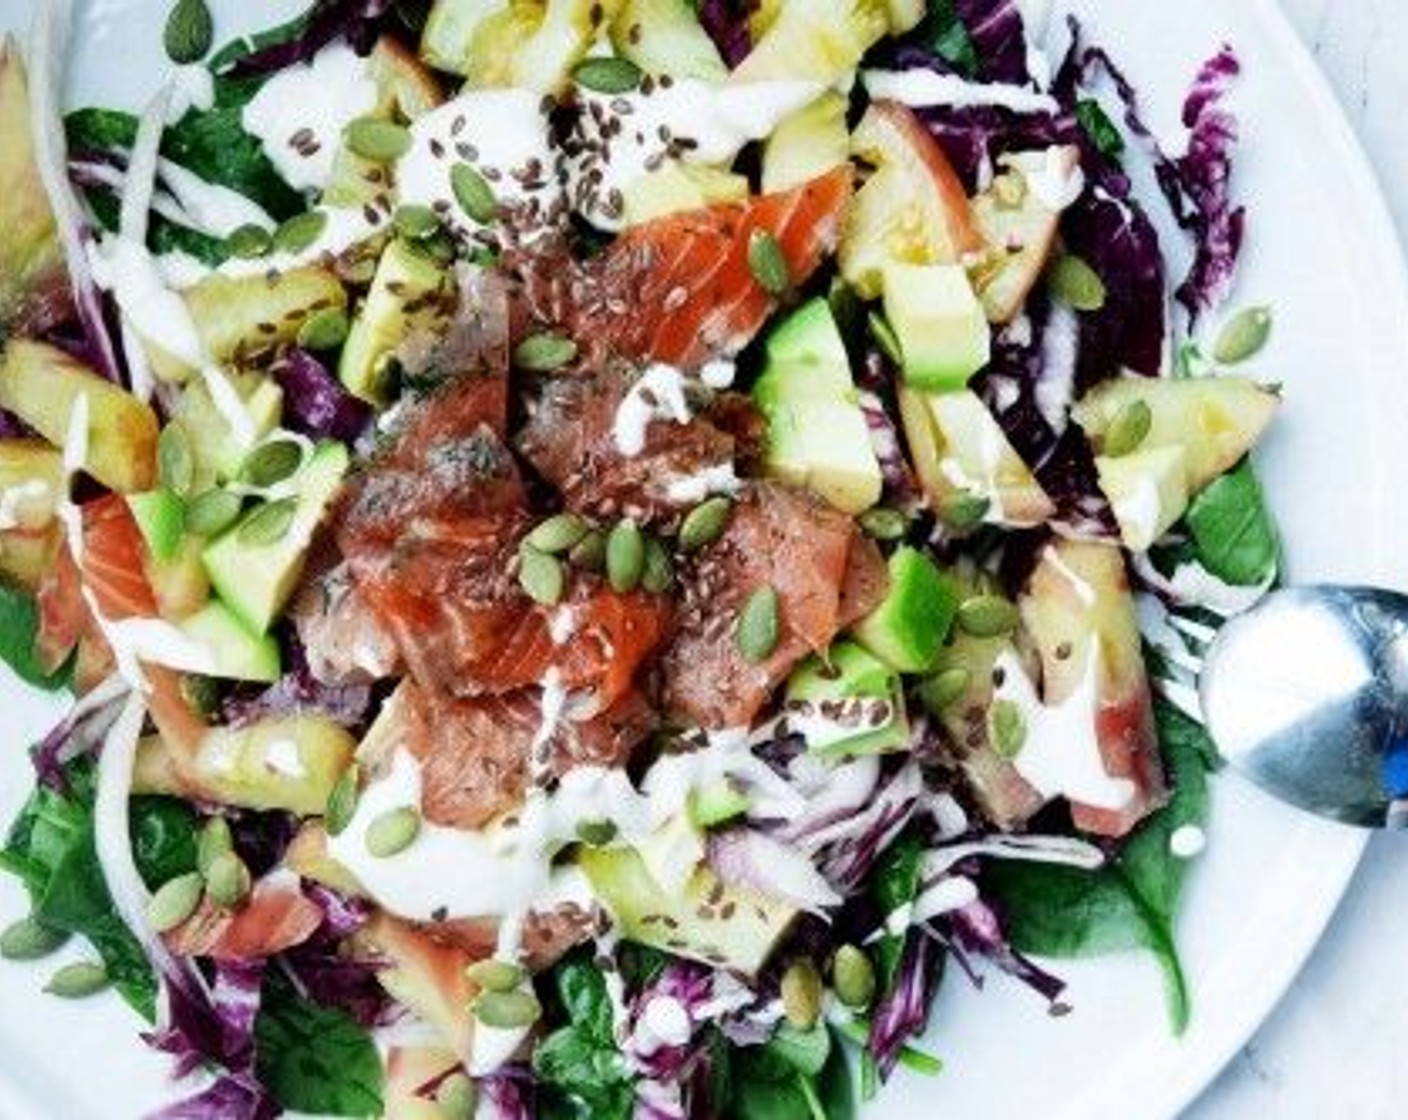 Baby Spinach and Radicchio Salad with Cured Salmon